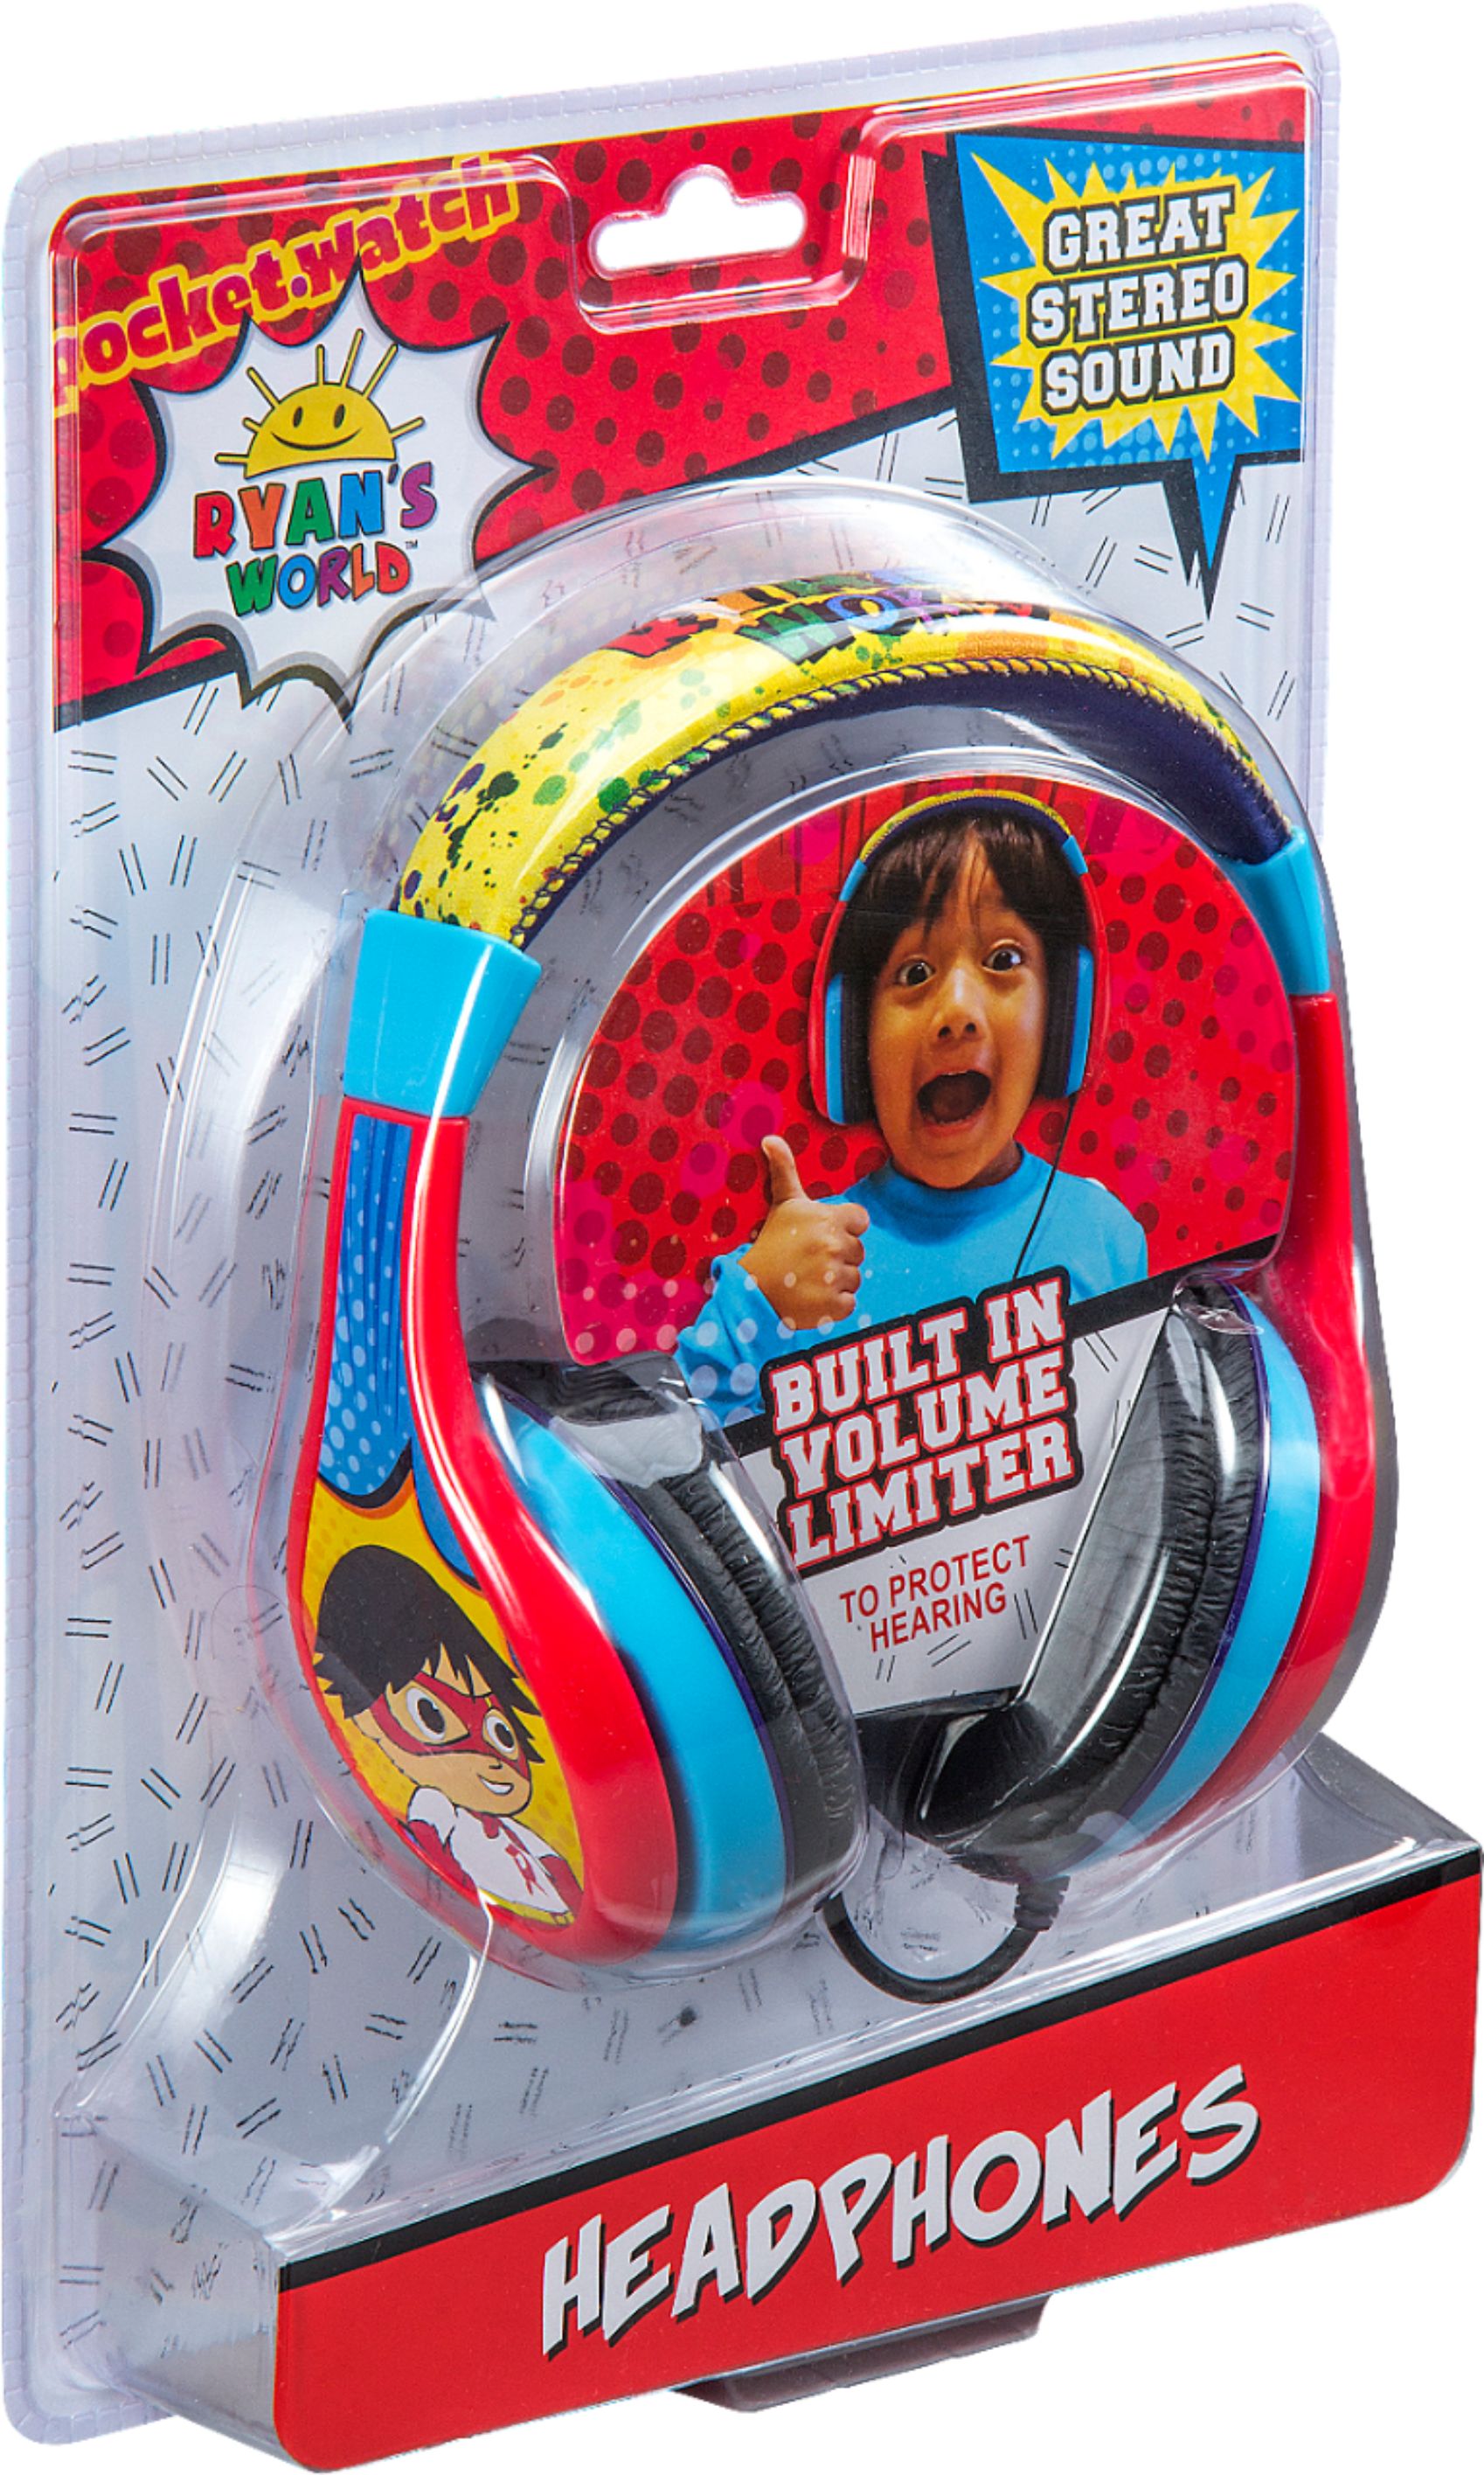 Angle View: eKids - Ryan's World Wired On-Ear Headphones - Yellow/Red/Blue/Black